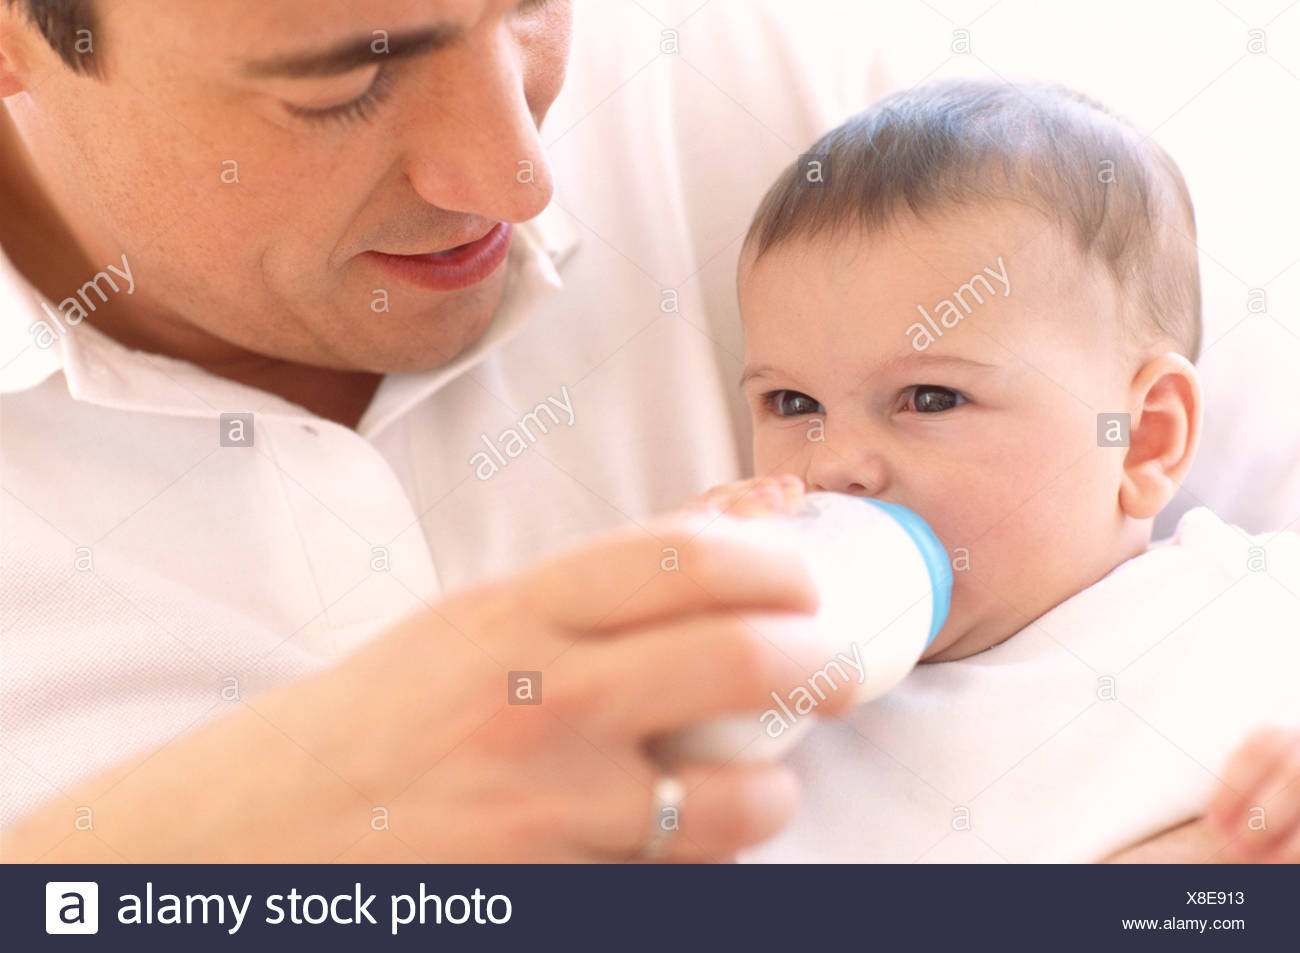 Father Bottle Feeding Baby Father Using A Bottle To Feed Milk To